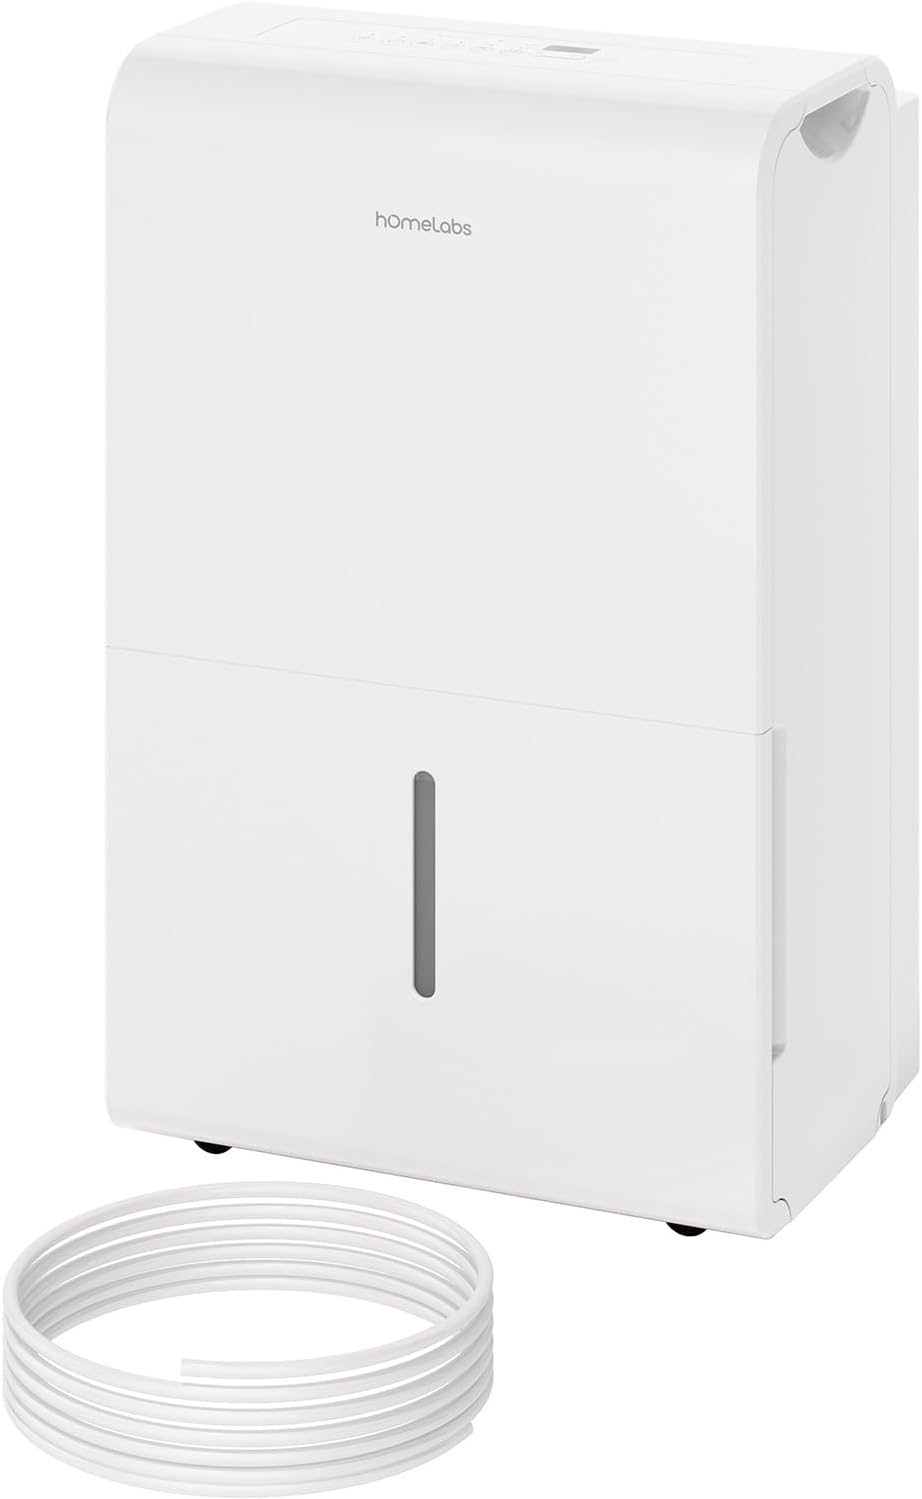 https://bigbigmart.com/wp-content/uploads/2023/12/hOmeLabs-4500-Sq.-Ft.-Energy-Star-Dehumidifier-with-Pump-Ideal-for-Large-Rooms-Home-Basements-and-Whole-House-Powerful-Moisture-Removal-and-Humidity-Control-50-Pint-Previously-70-Pint.jpg